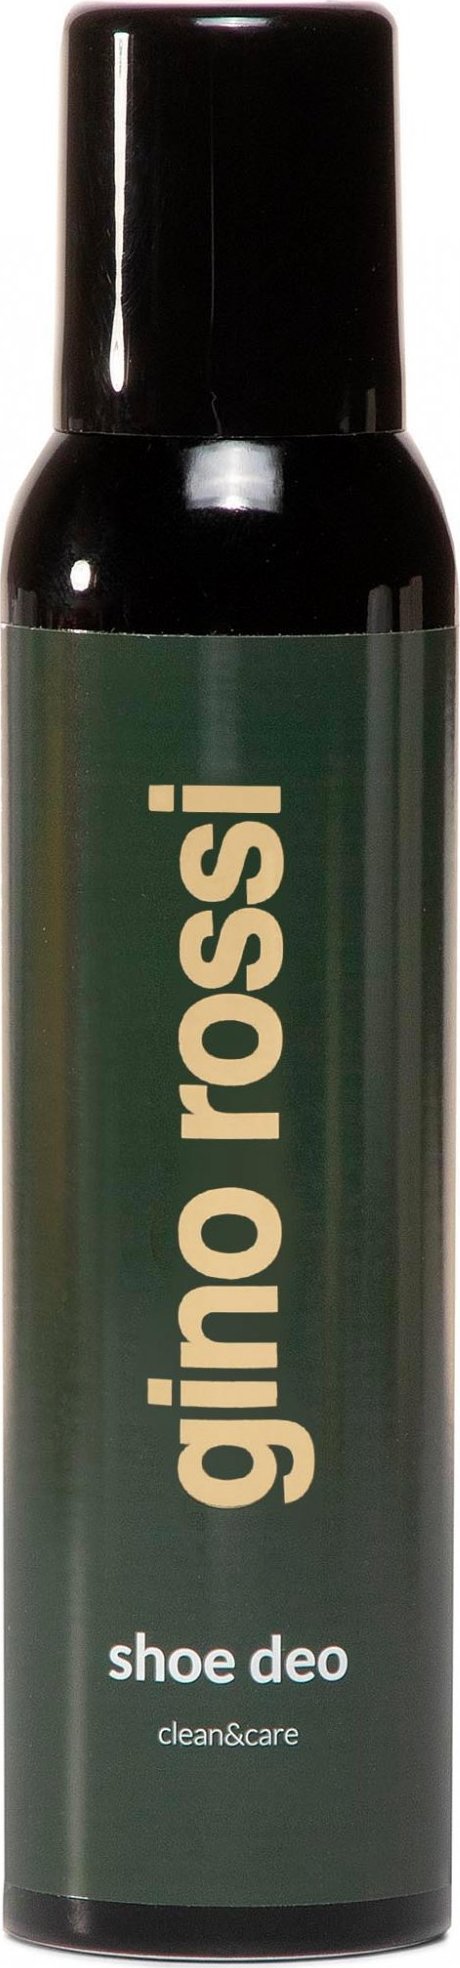 Gino Rossi Shoe Deo Clean&Care